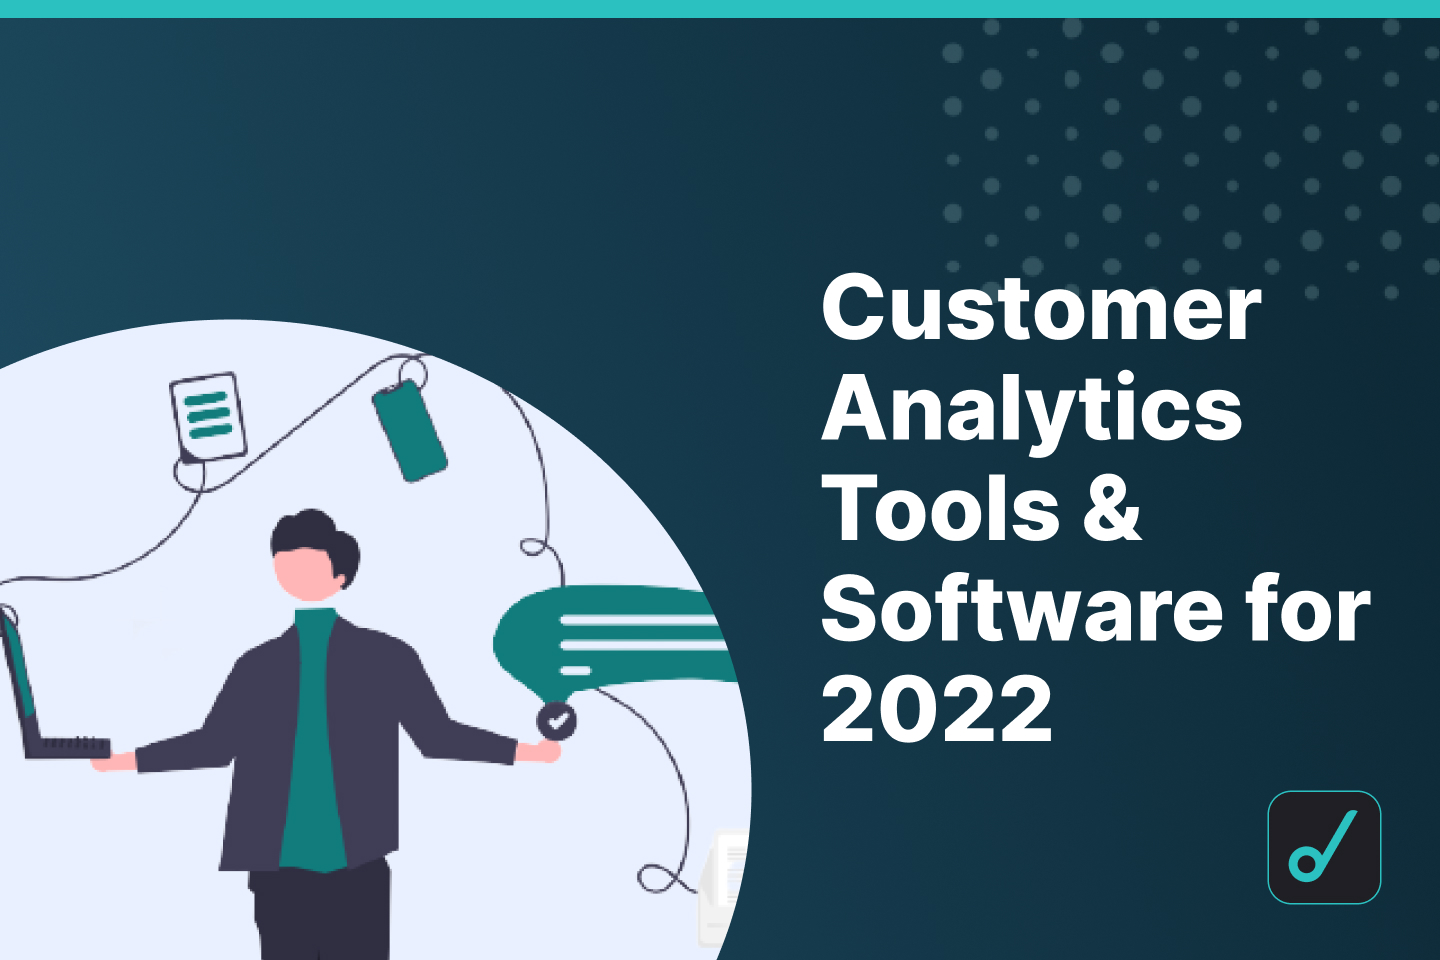 Top 8 Customer Analytics Tools & Software for 2022